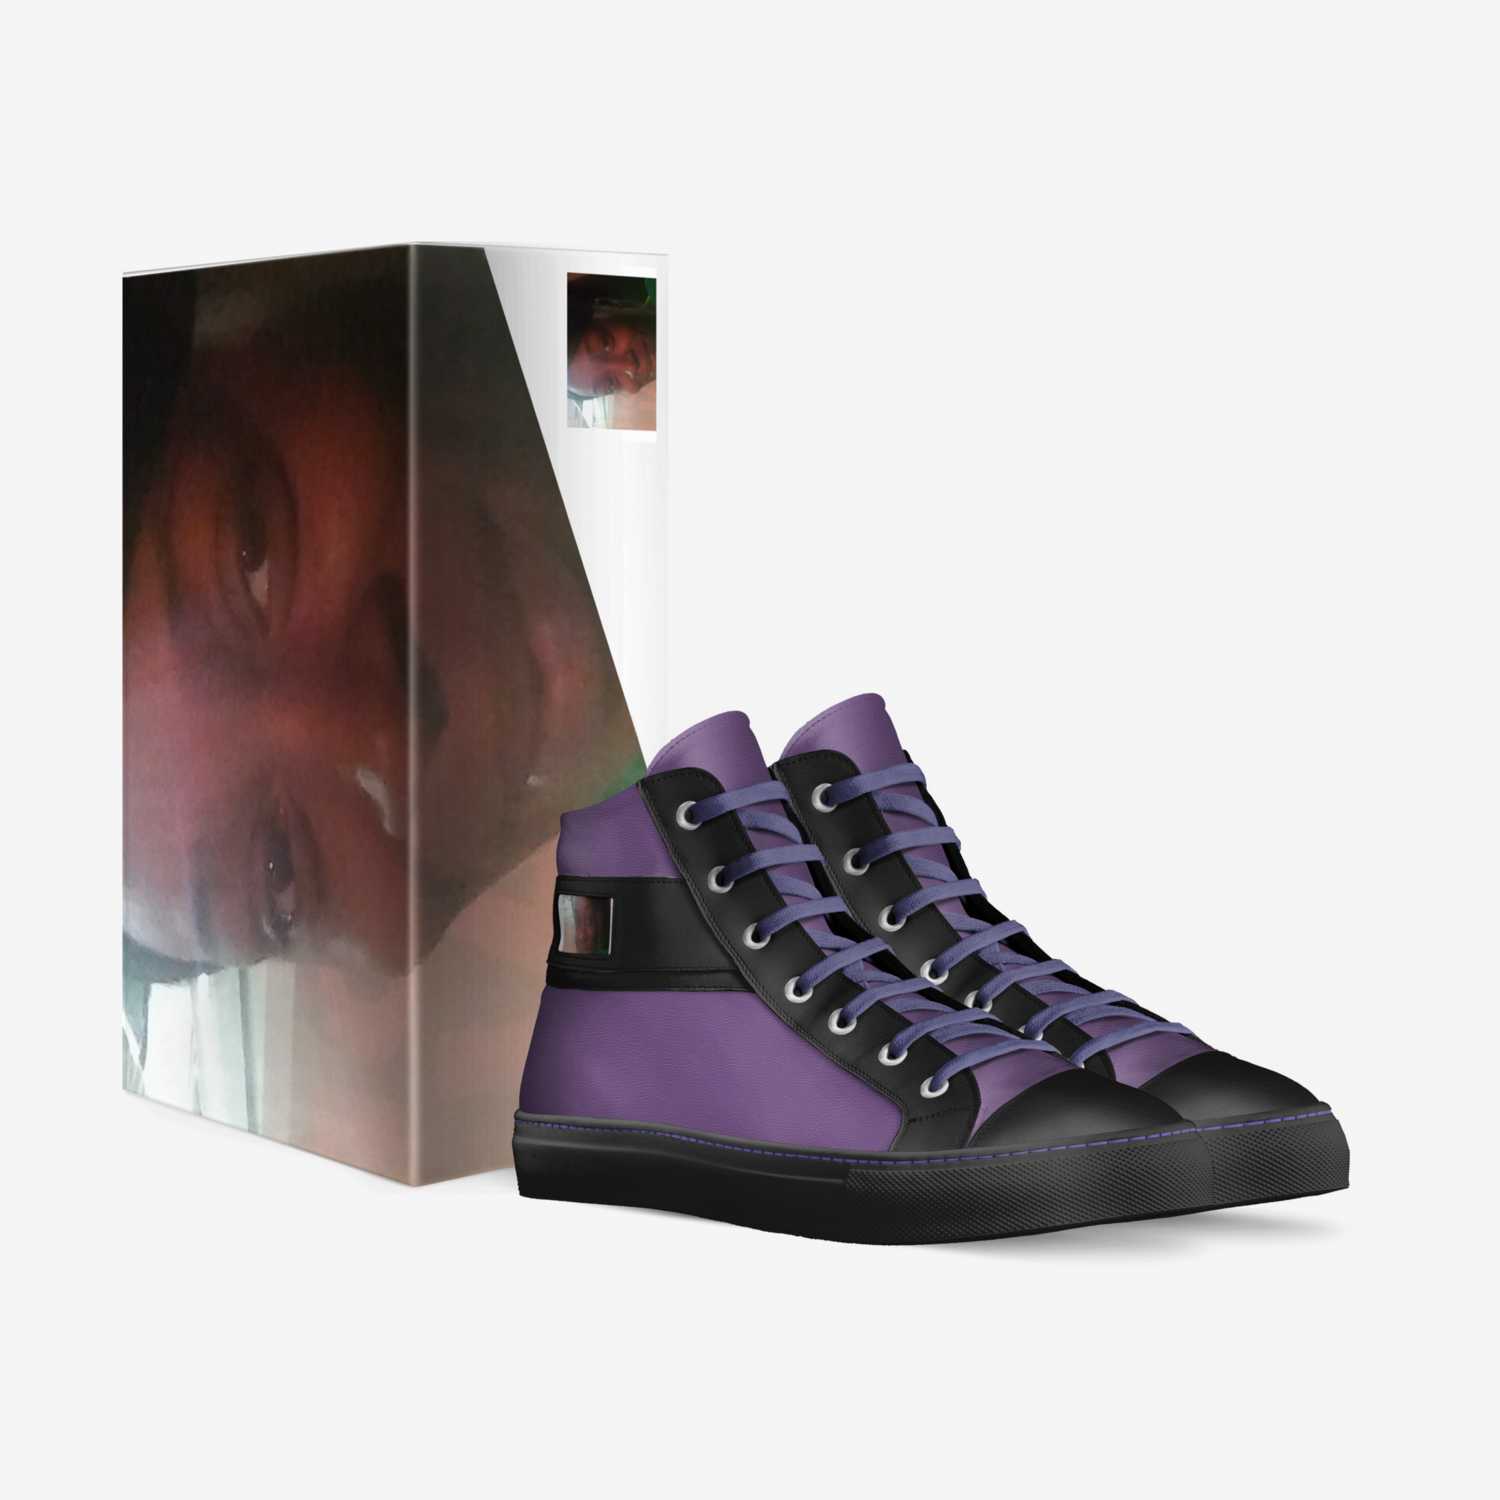 Racheal custom made in Italy shoes by Demond Porterfield | Box view